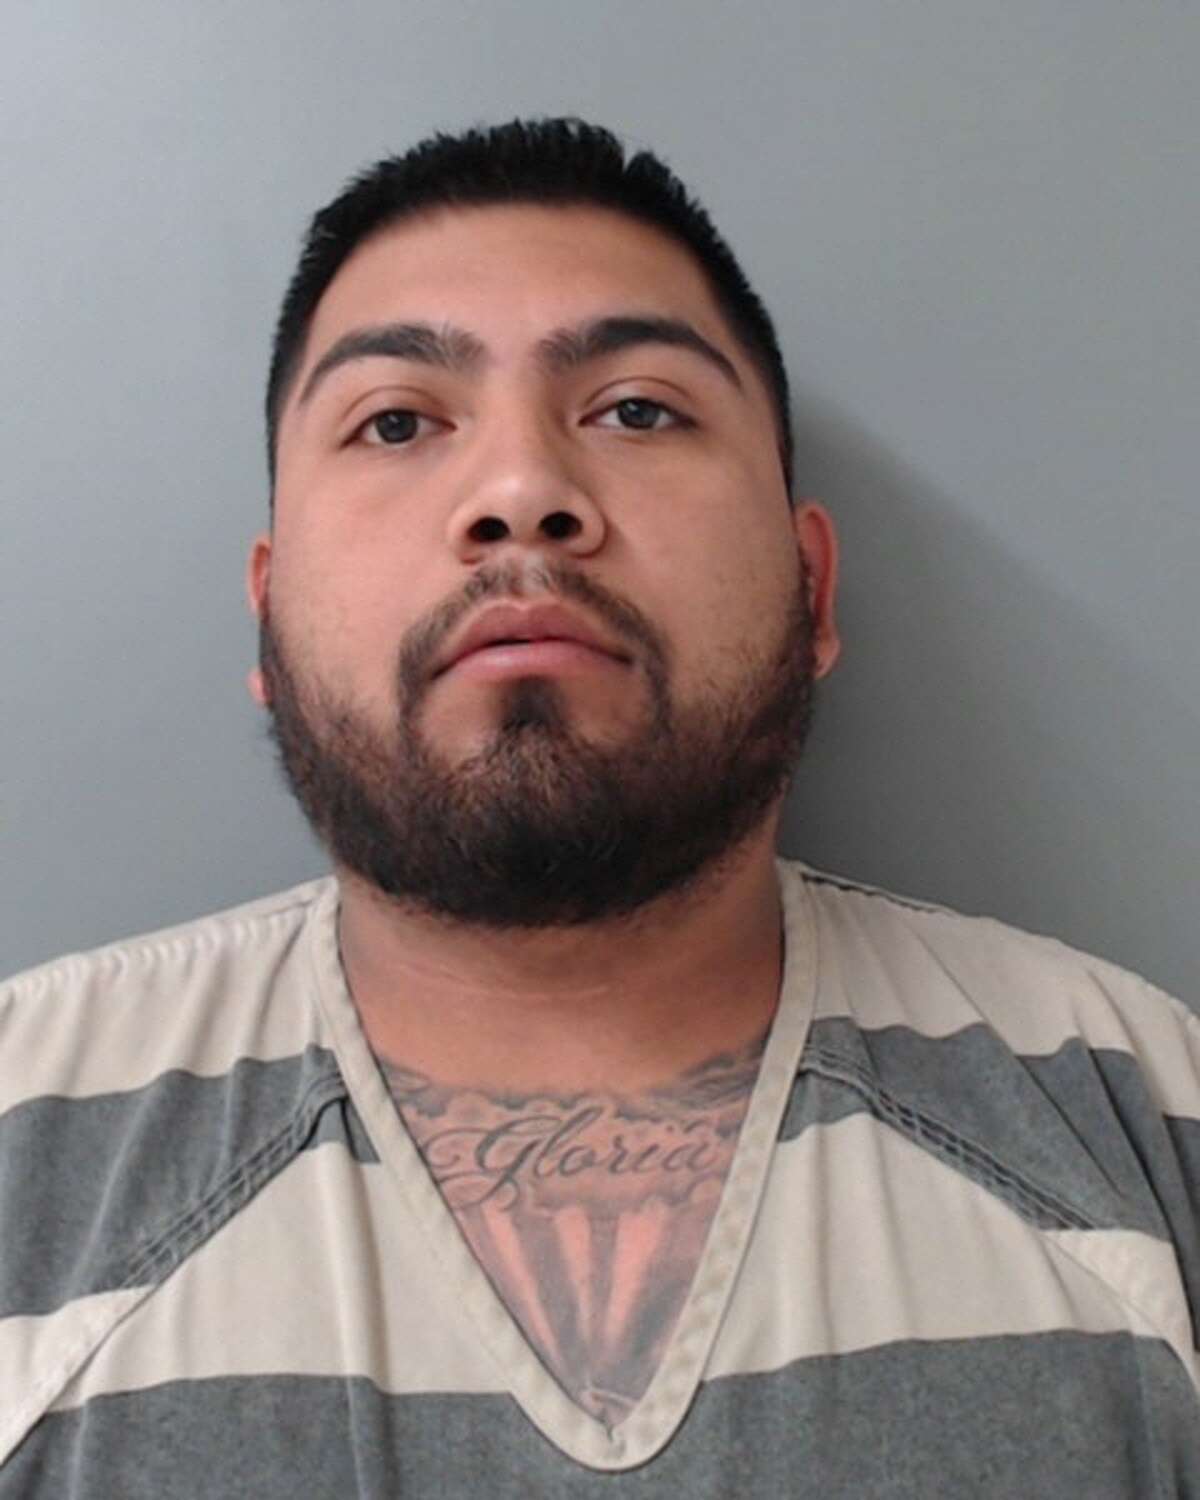 Gilberto Guadalupe Villarreal, 23, was charged with murder in the shooting death of a decorated Texas Army National Guard soldier.